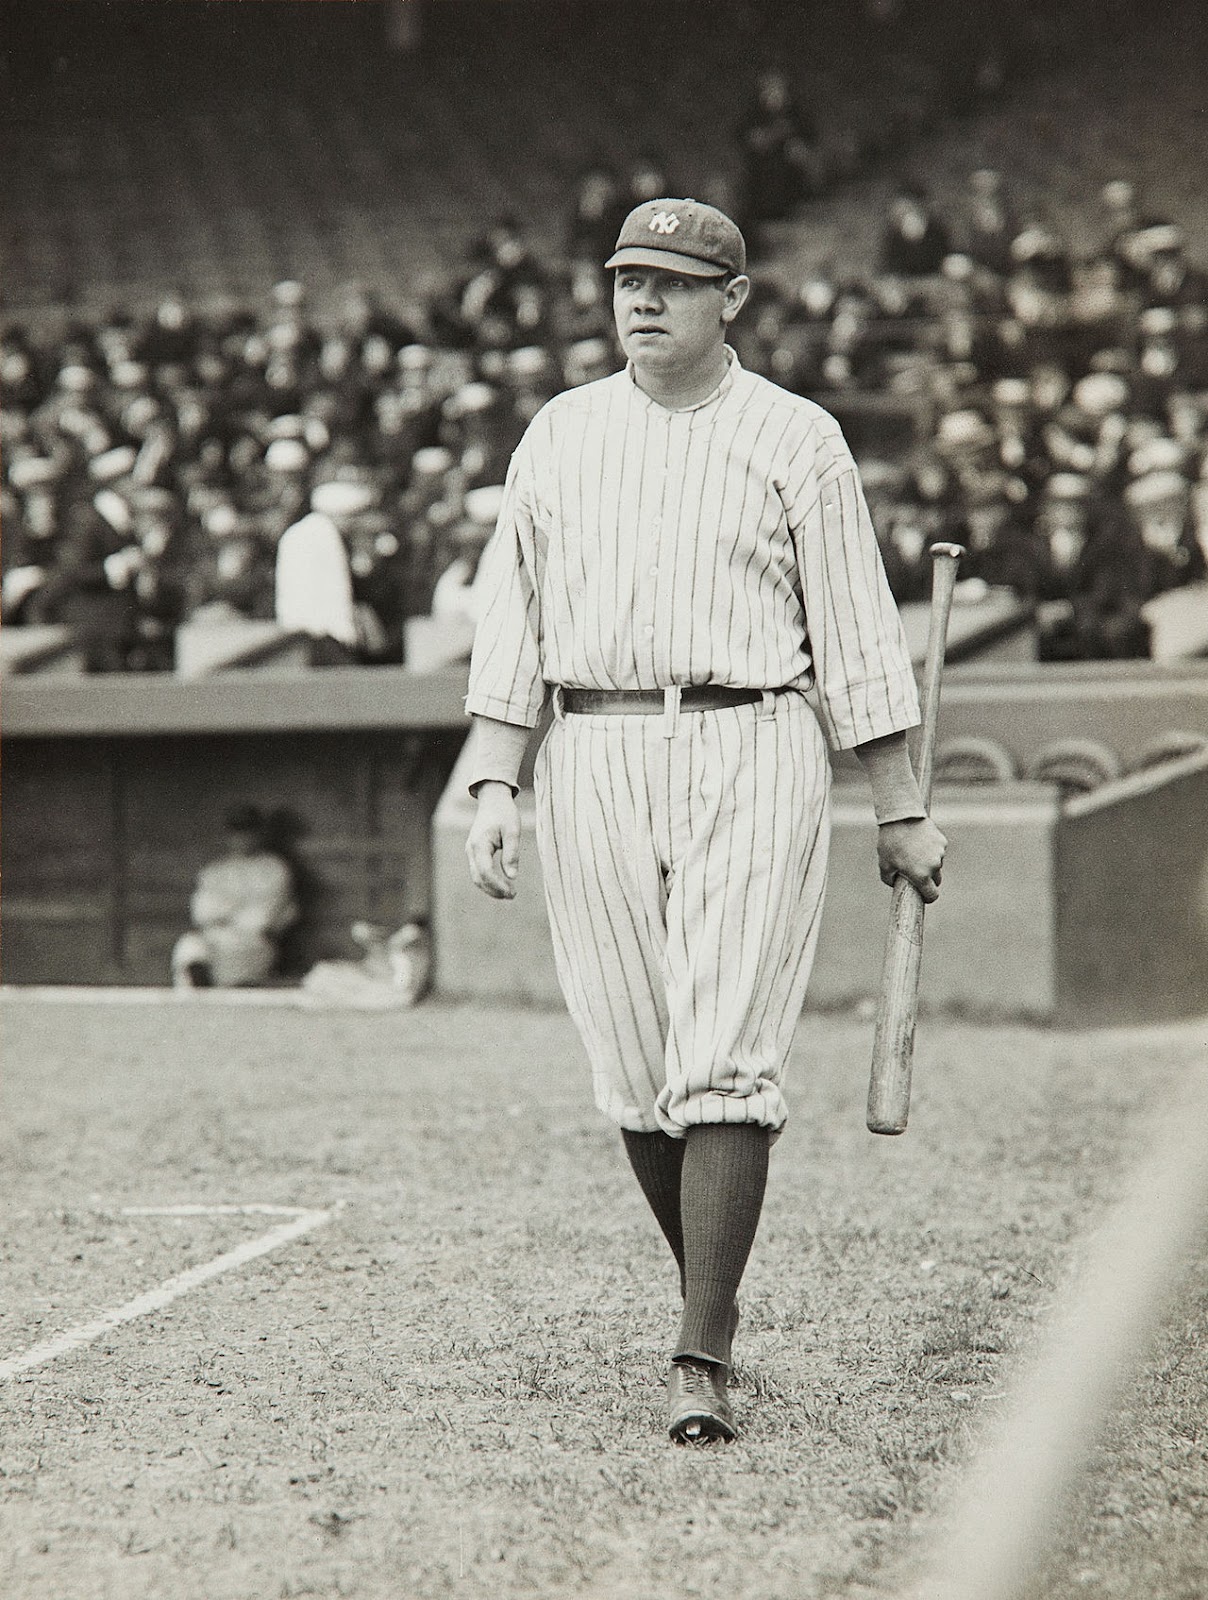 Babe Ruth in 1920 during his first year with the New York Yankees